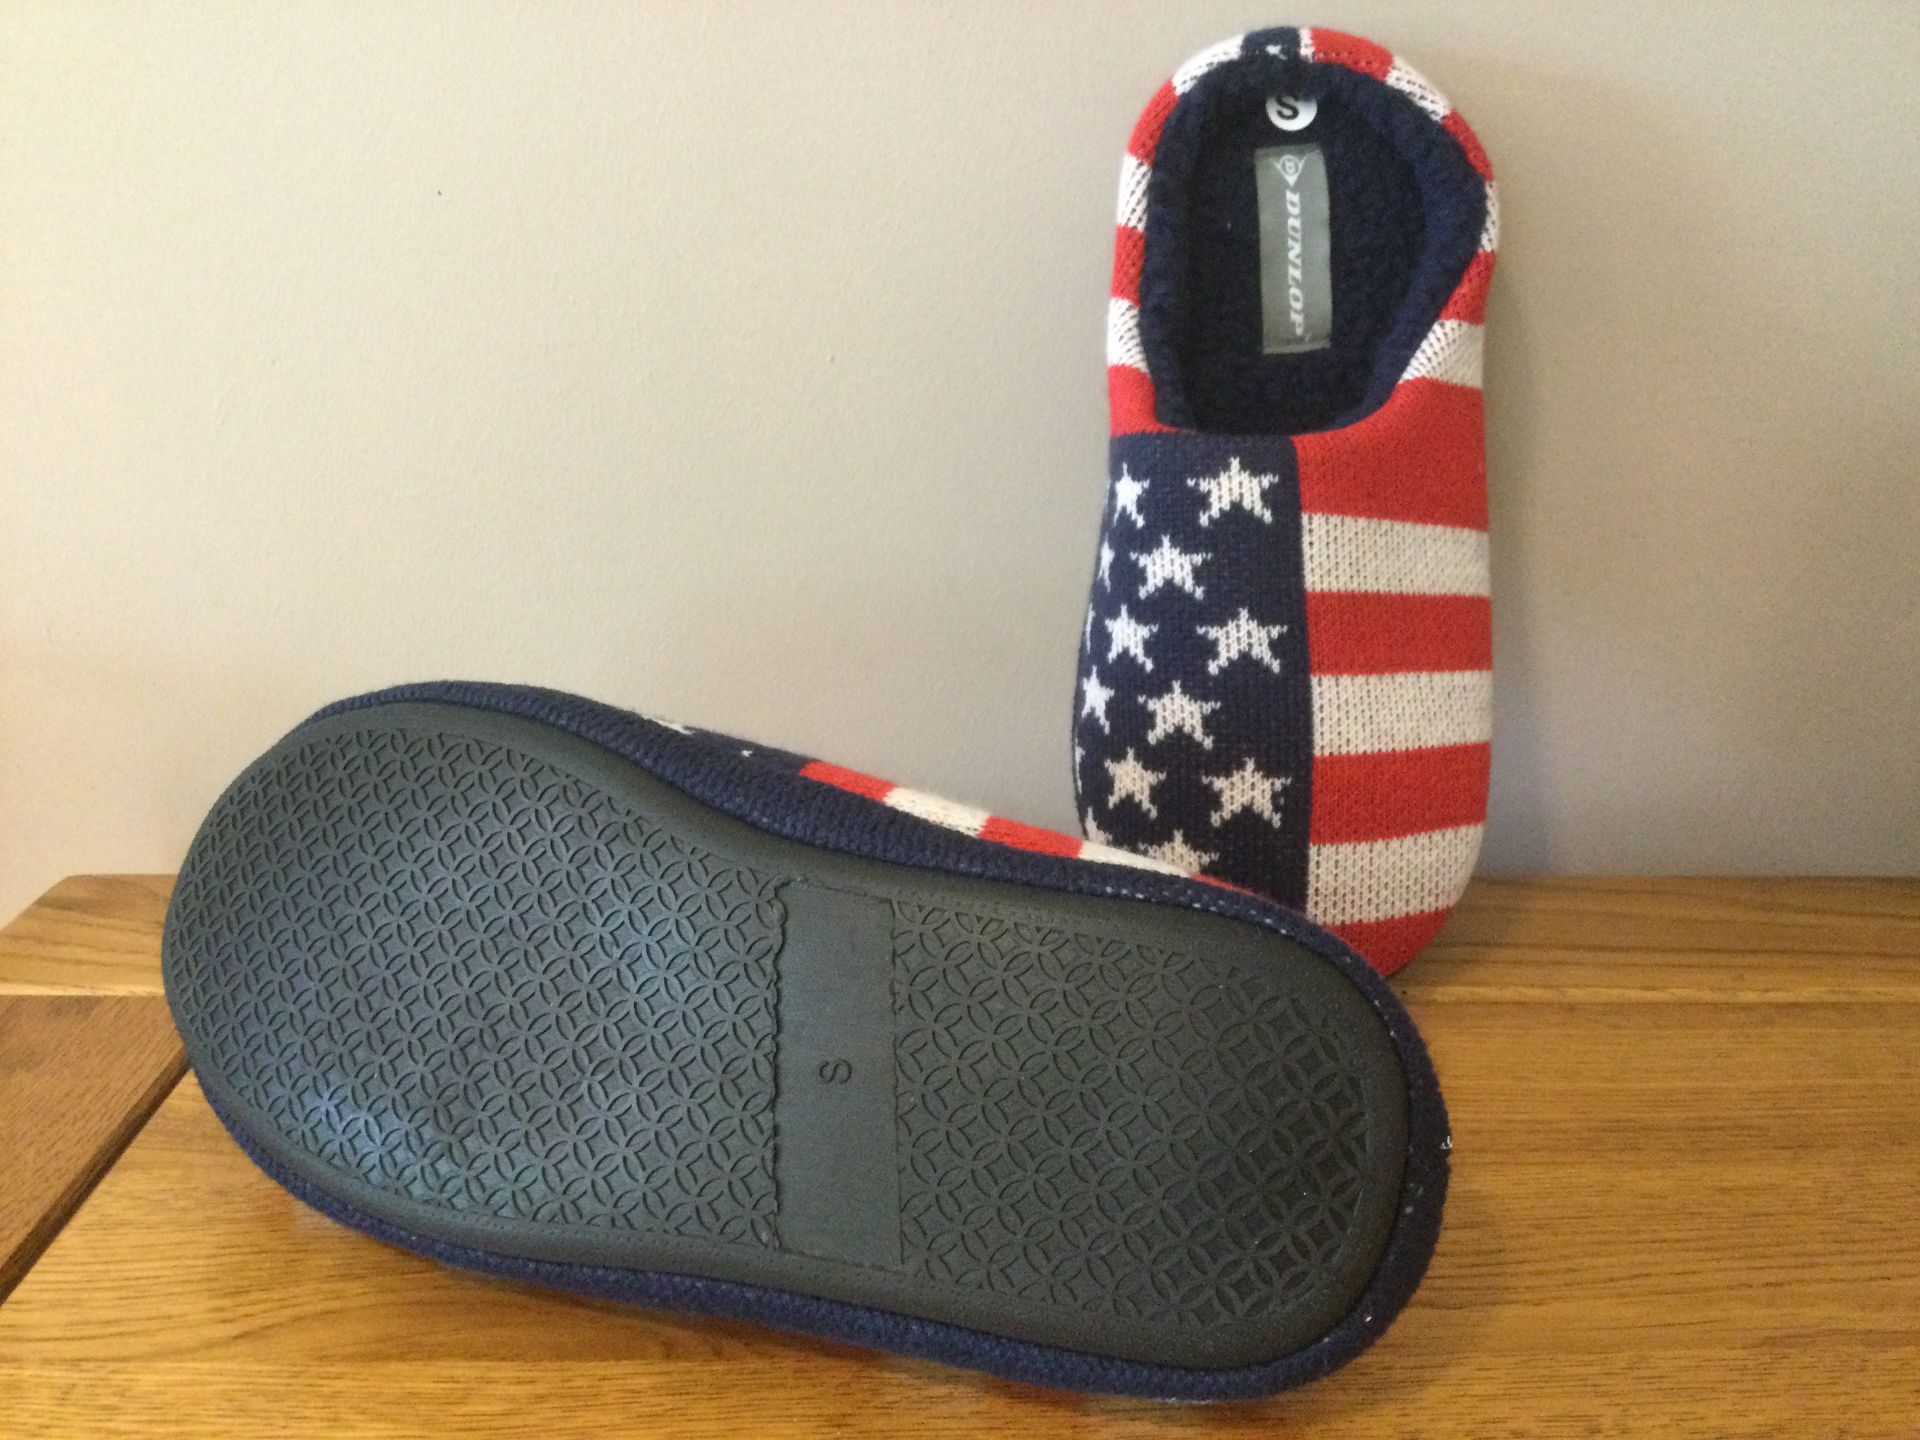 Men's Dunlop, “USA Stars and Stripes” Memory Foam, Mule Slippers, Size S (6/7) - New - Image 3 of 4